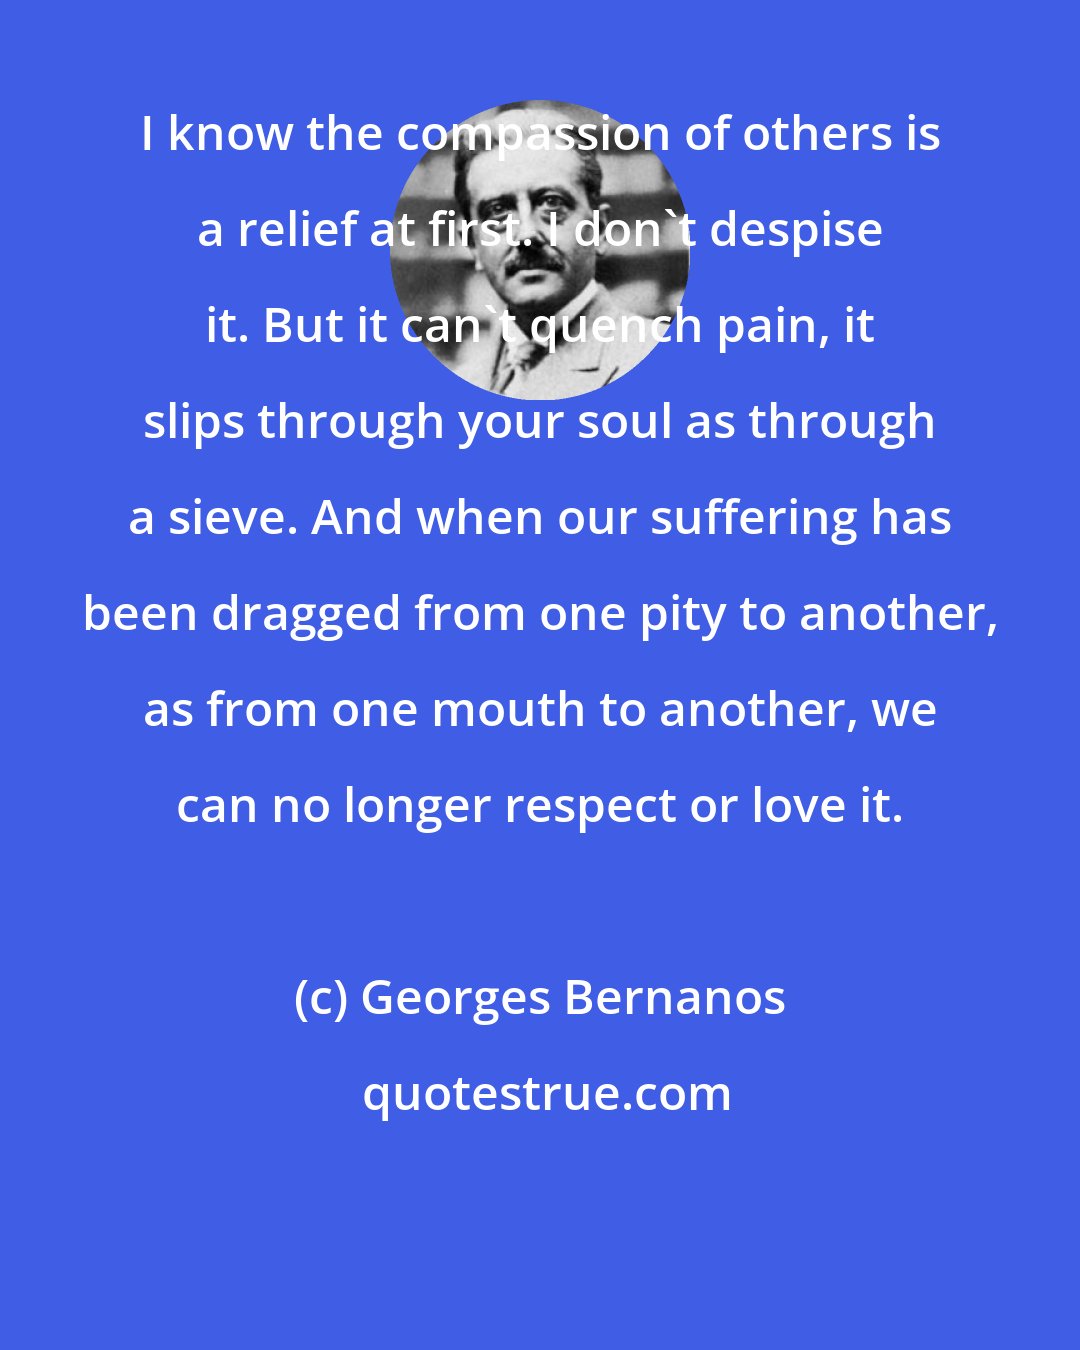 Georges Bernanos: I know the compassion of others is a relief at first. I don't despise it. But it can't quench pain, it slips through your soul as through a sieve. And when our suffering has been dragged from one pity to another, as from one mouth to another, we can no longer respect or love it.